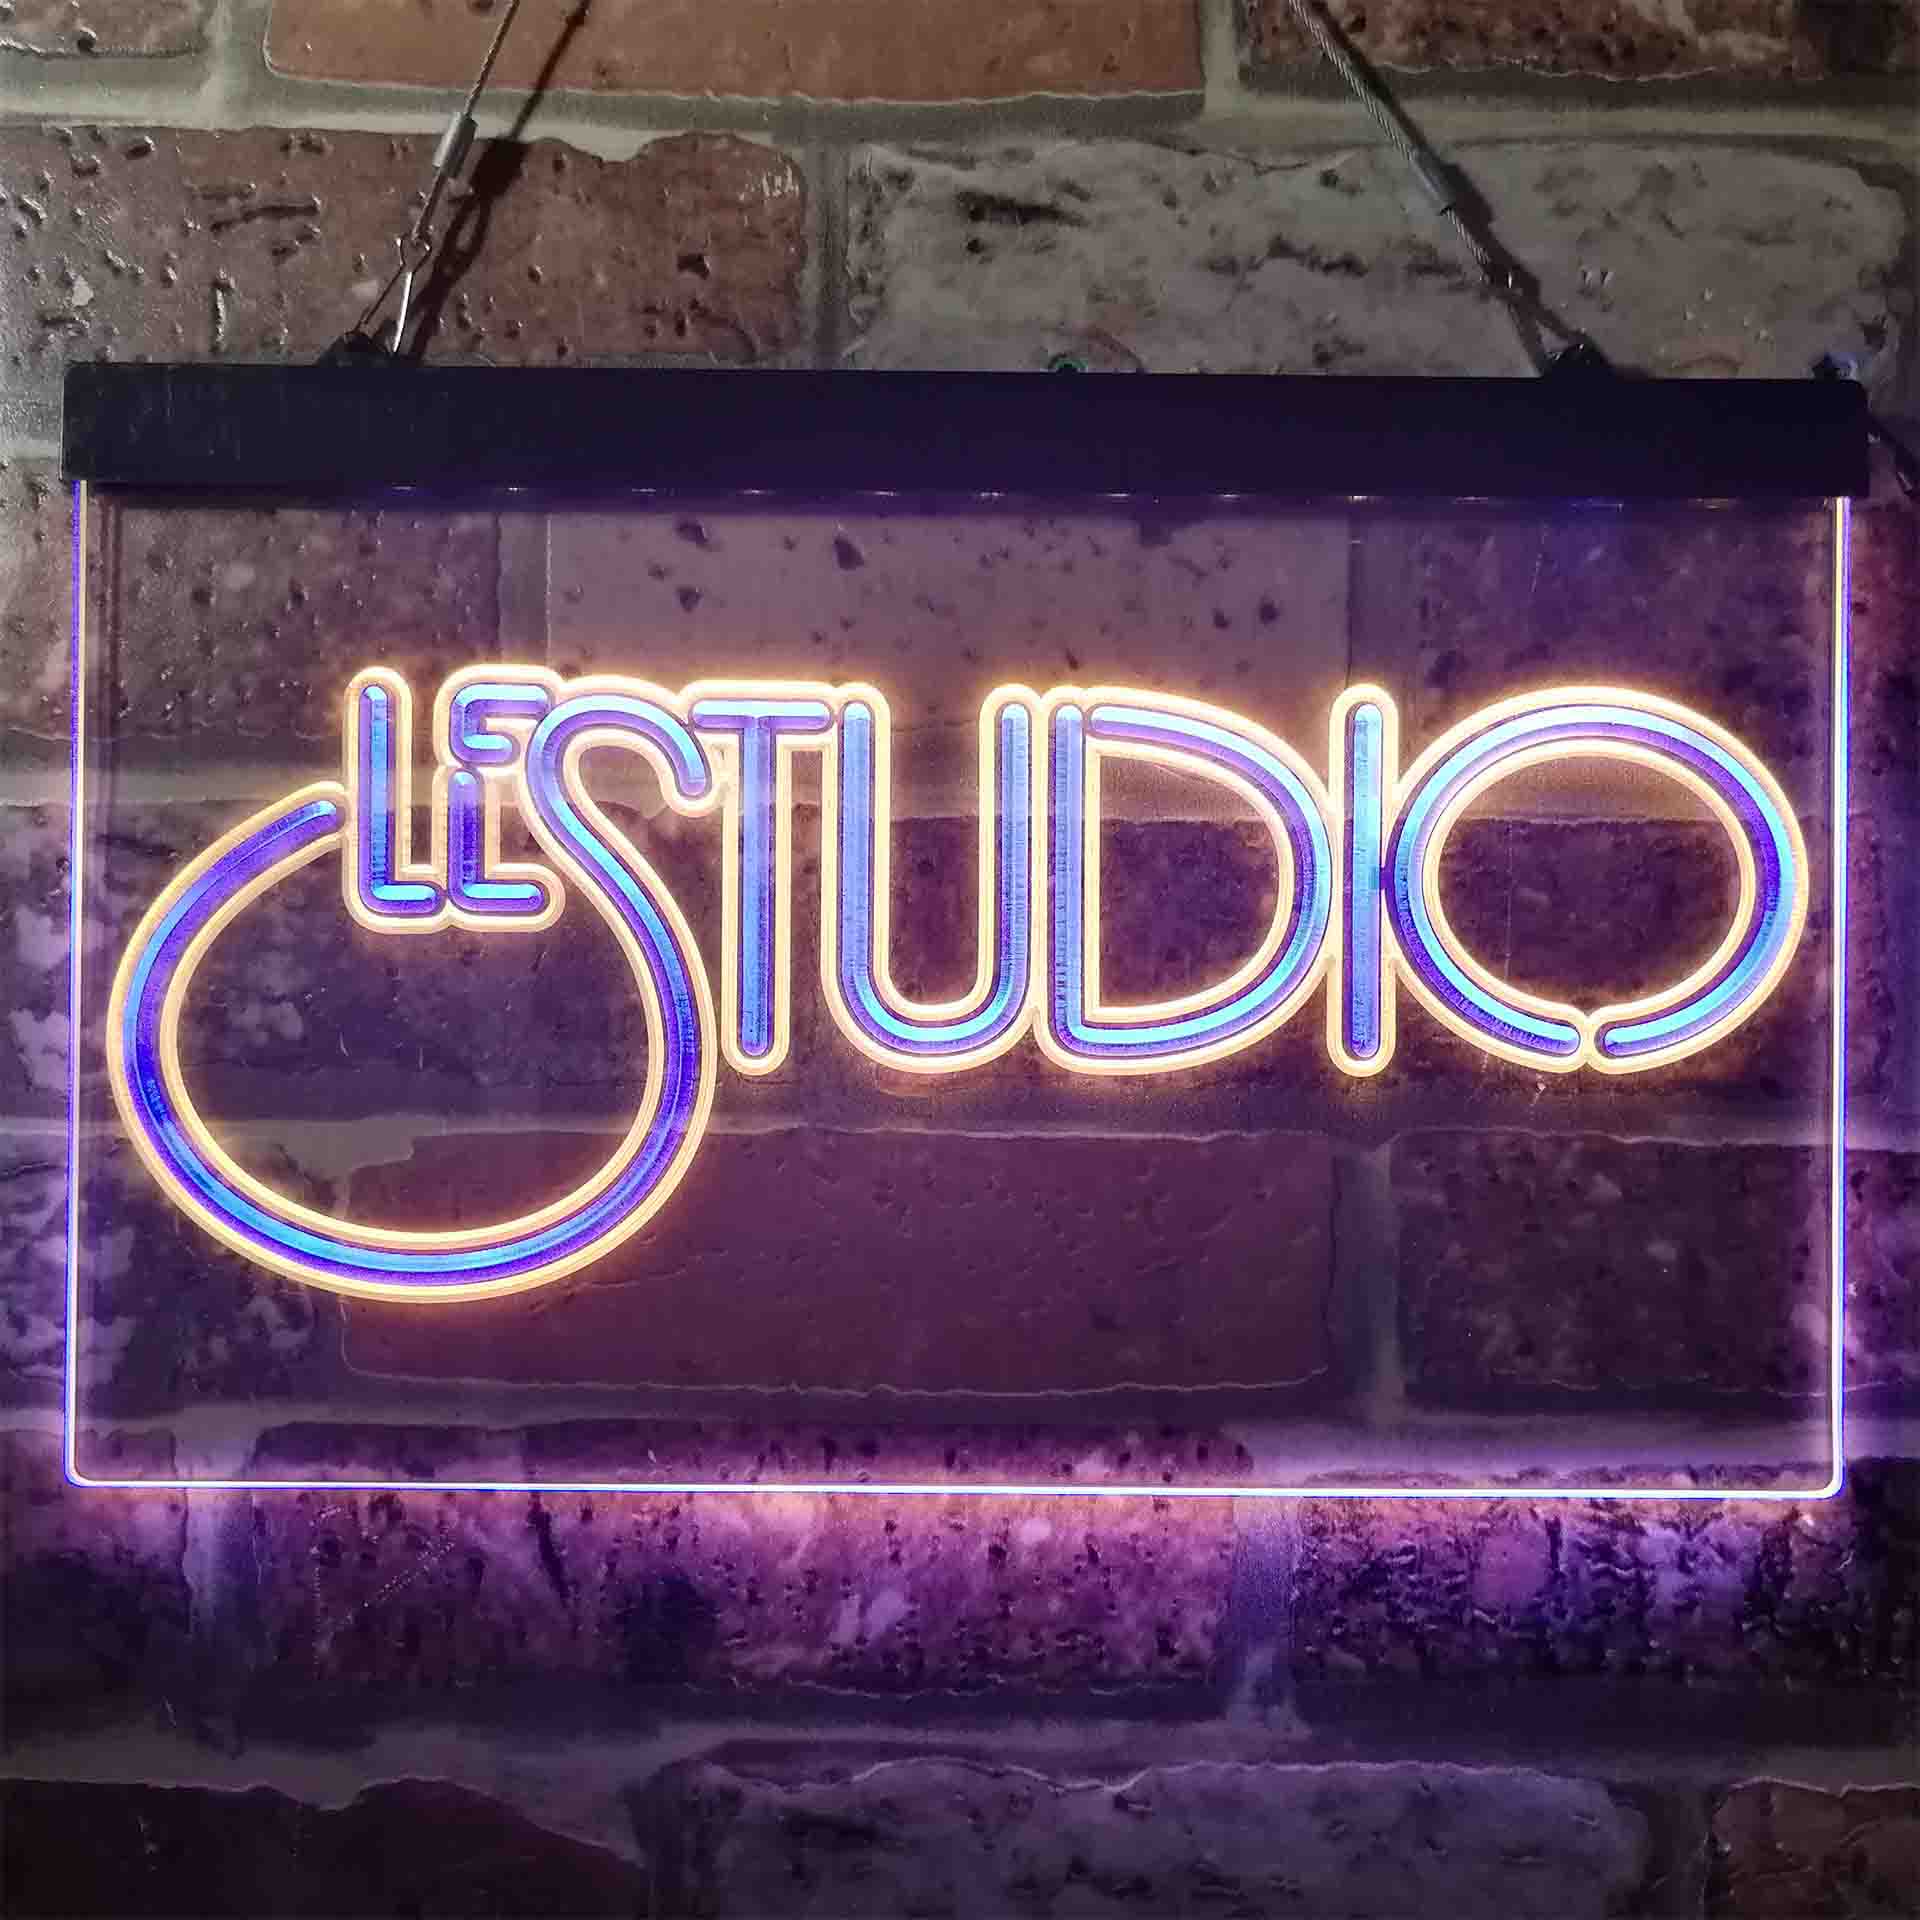 Le Studio Recording Service On Air LED Neon Sign